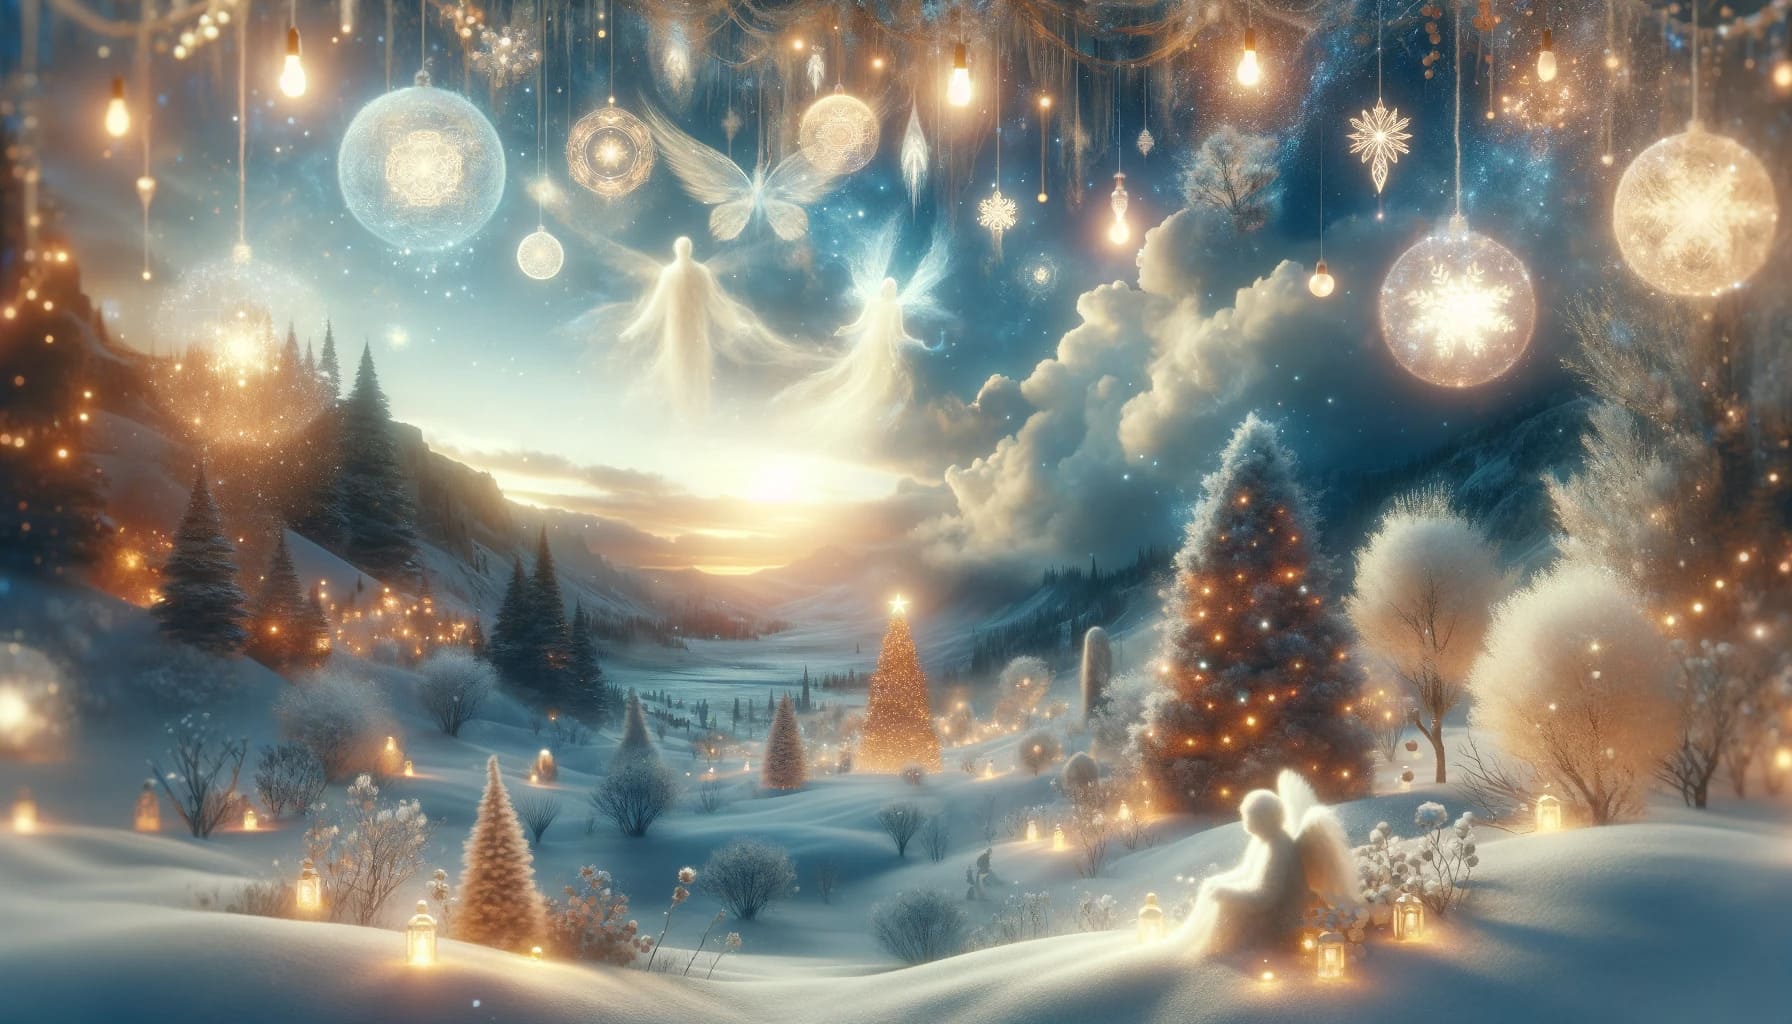 Dream of christmas meaning